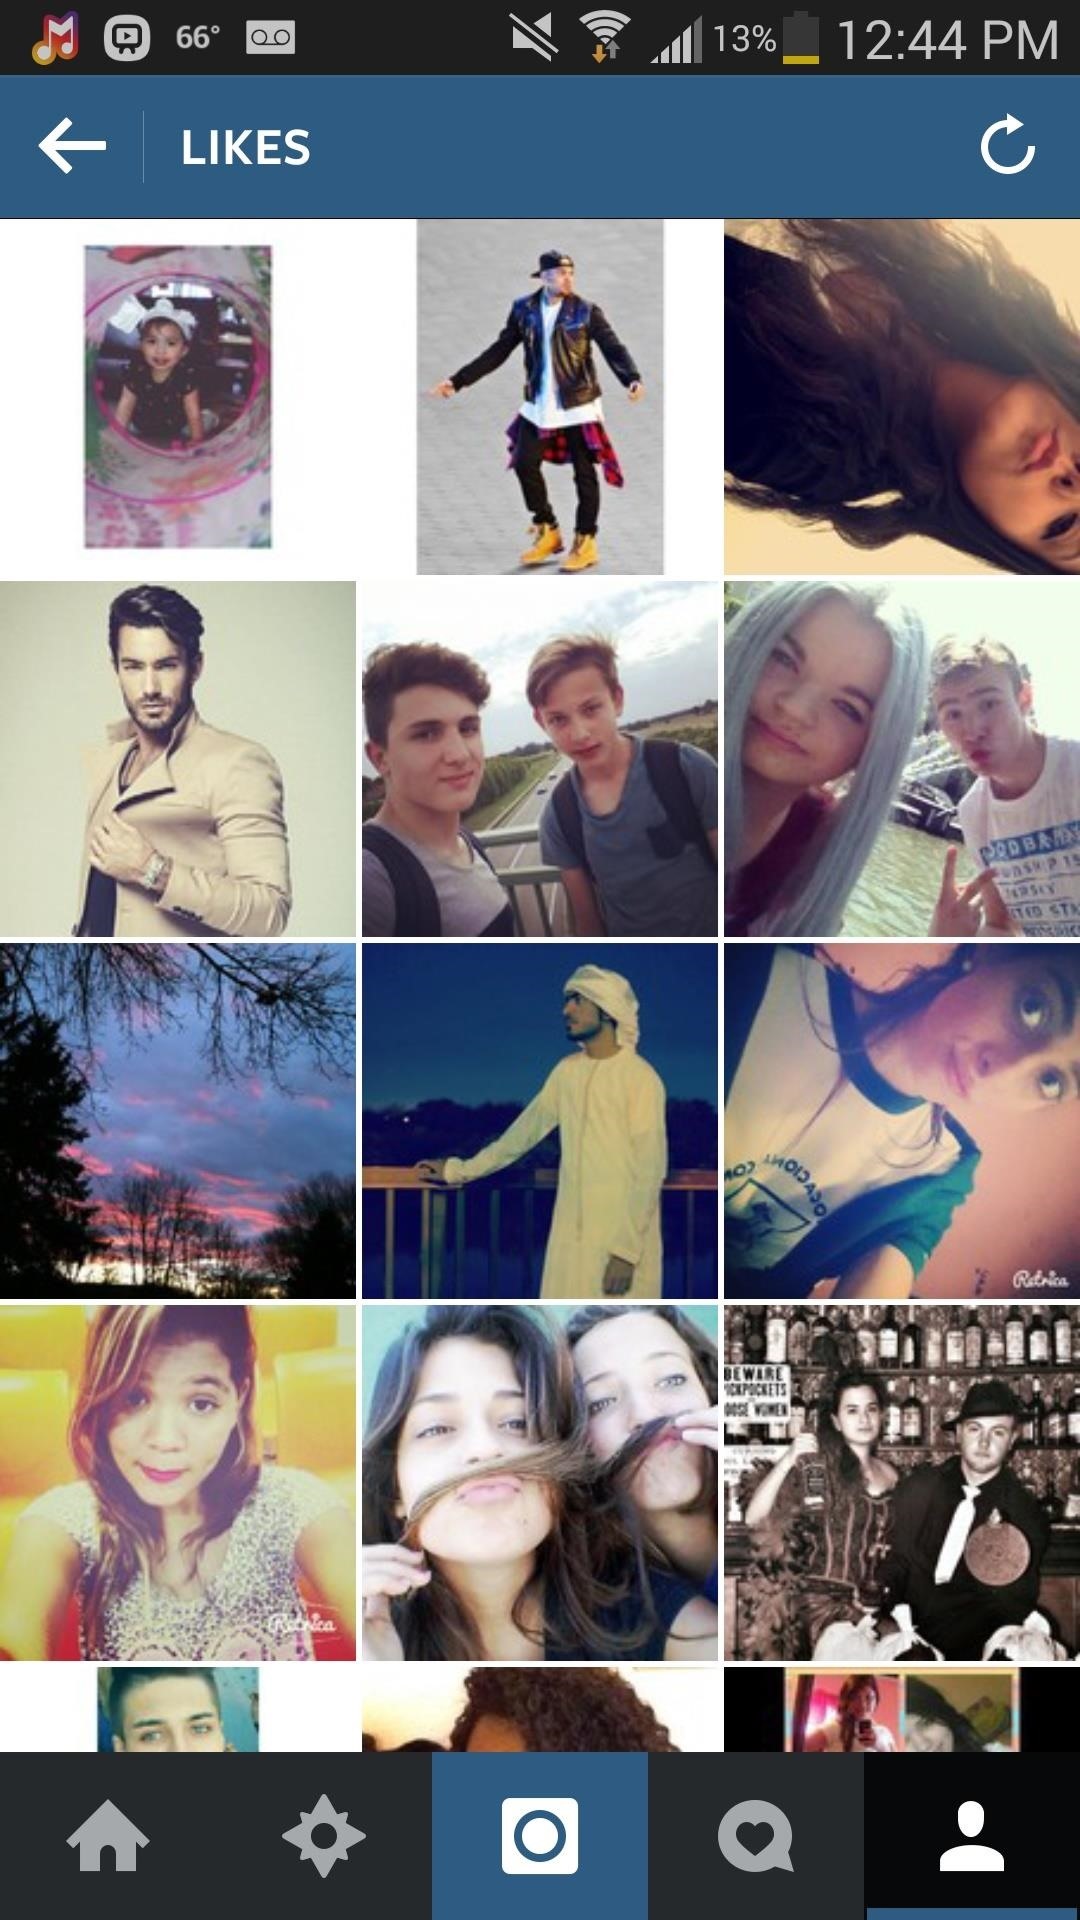 You Can Easily Hack Instagram for a Crazy Amount of Likes (But You Totally Shouldn't)